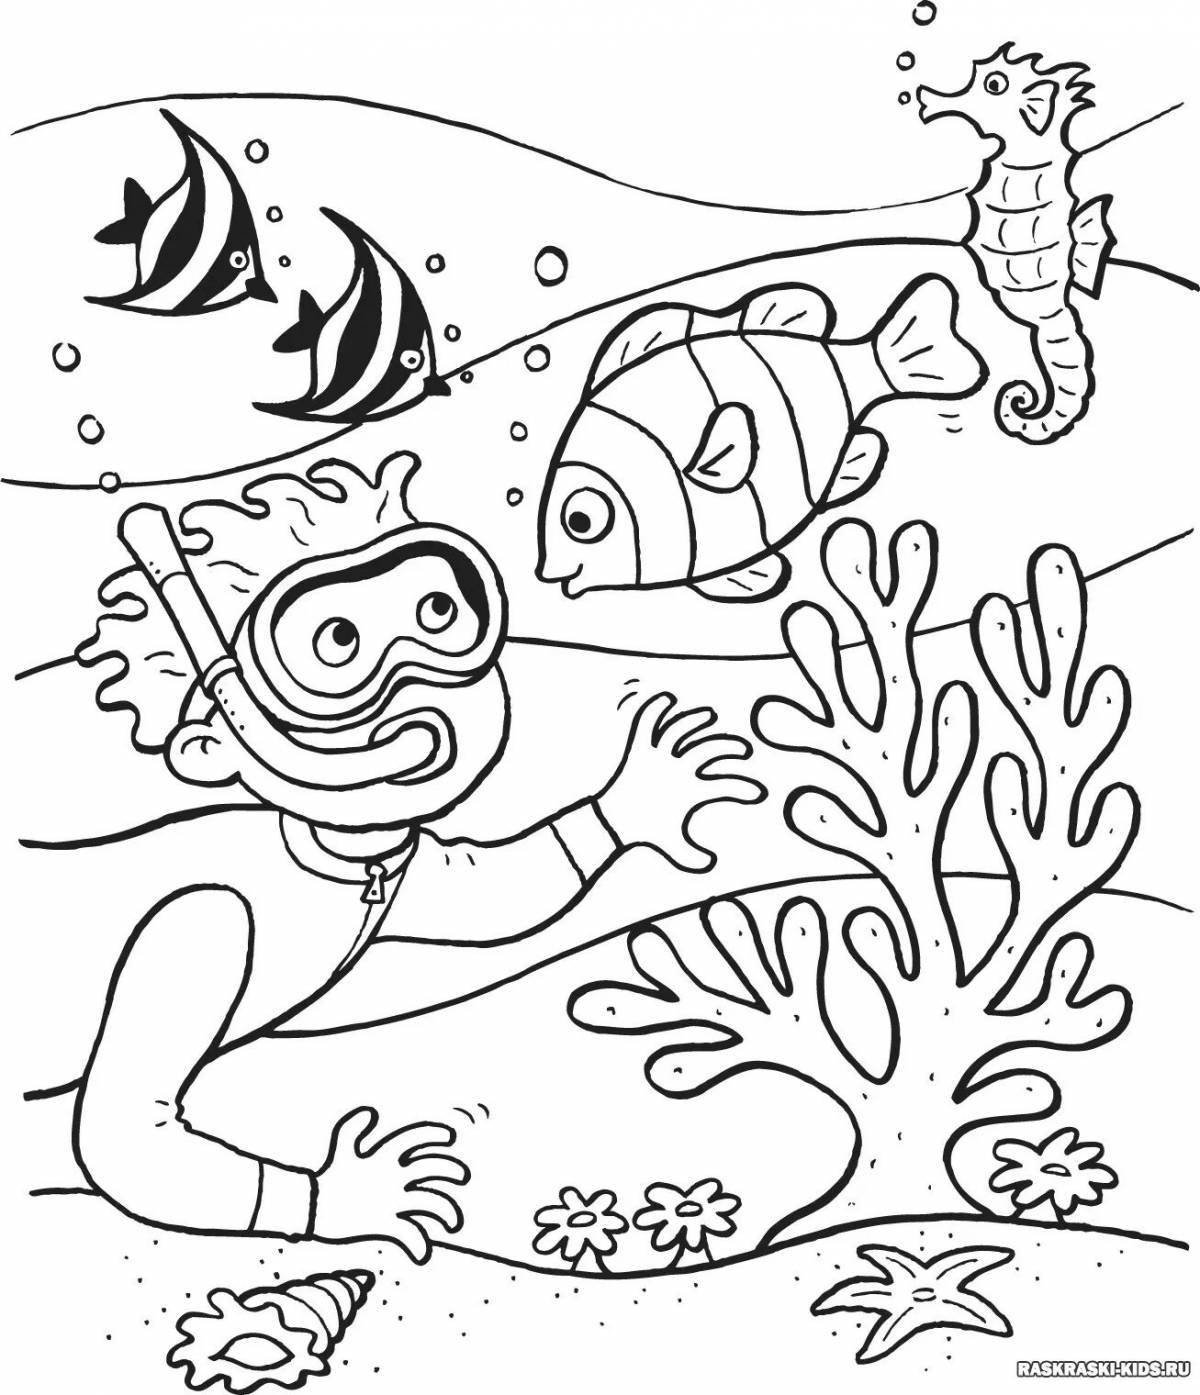 Glowing water world coloring page